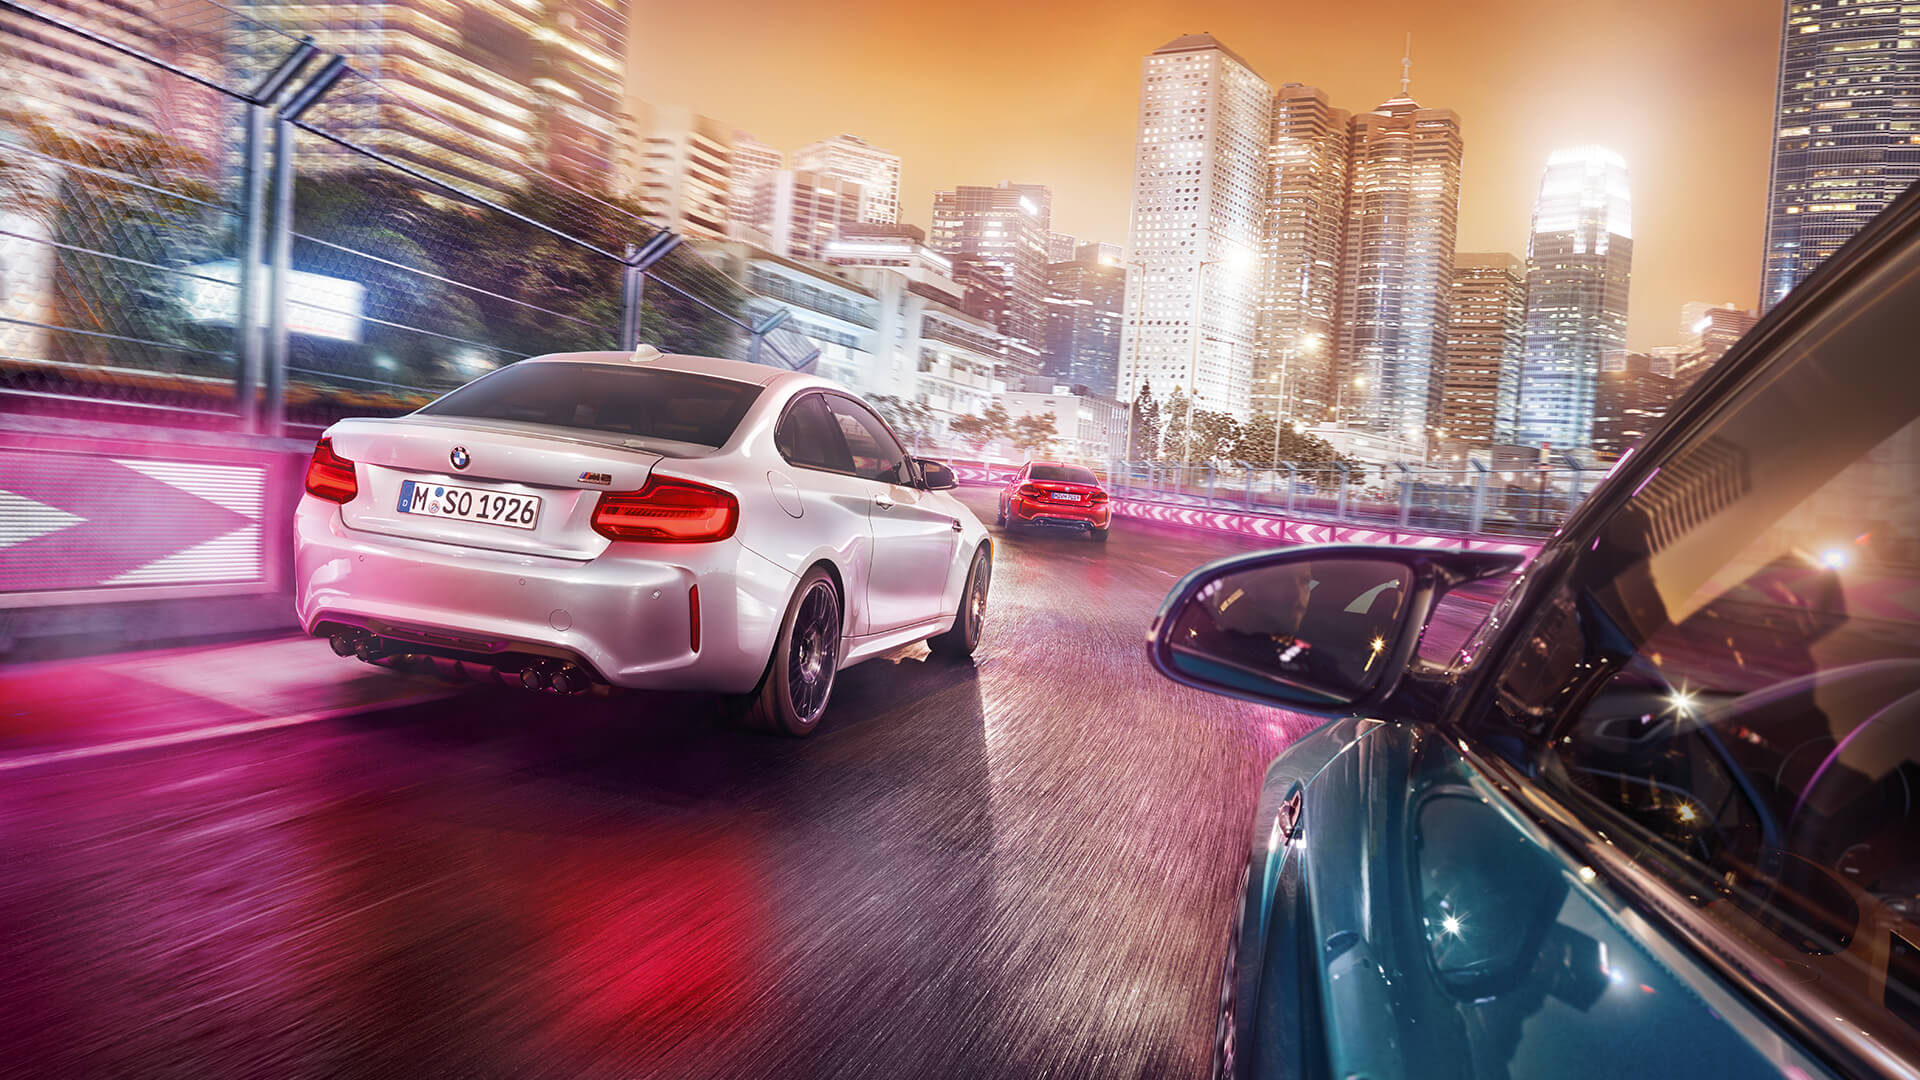 BMW Car German Cars BMW M2 Coupe BMW 2 Series Licence Plates Rear View Taillights City City Lights 1920x1080